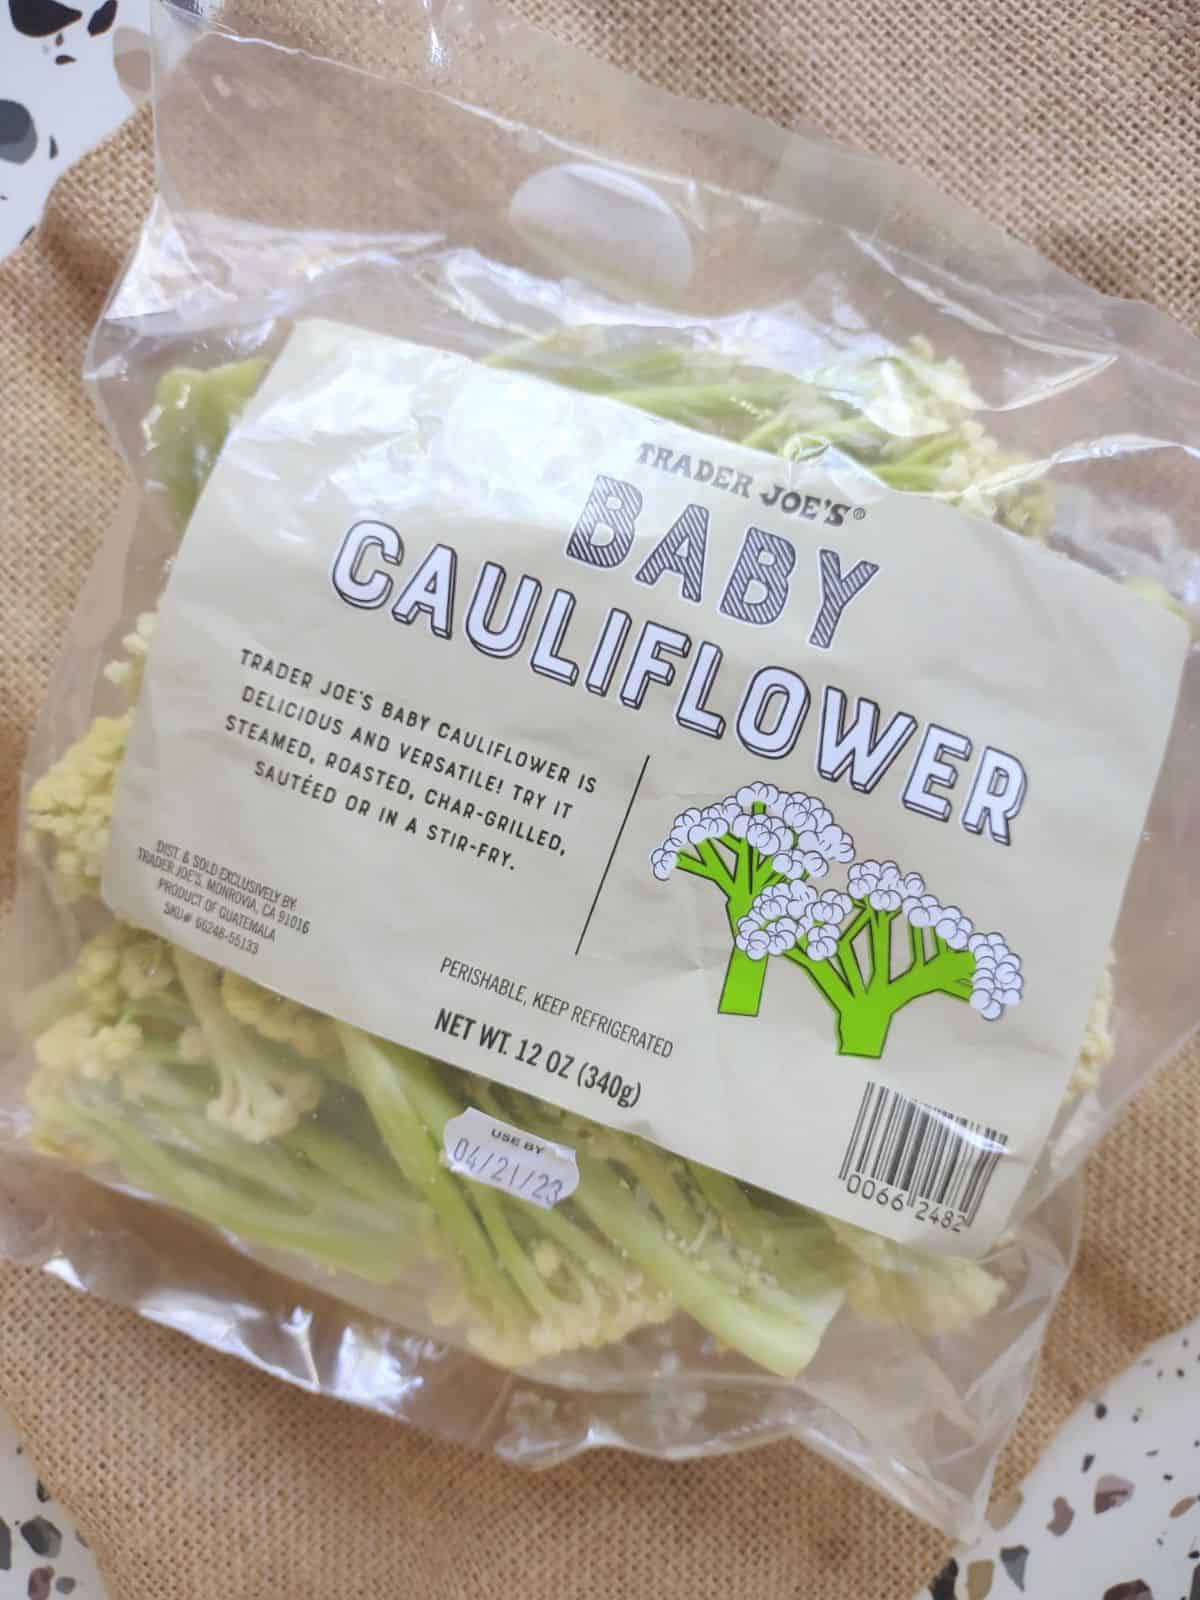 A bag of baby cauliflower from Trader Joe's on a table.